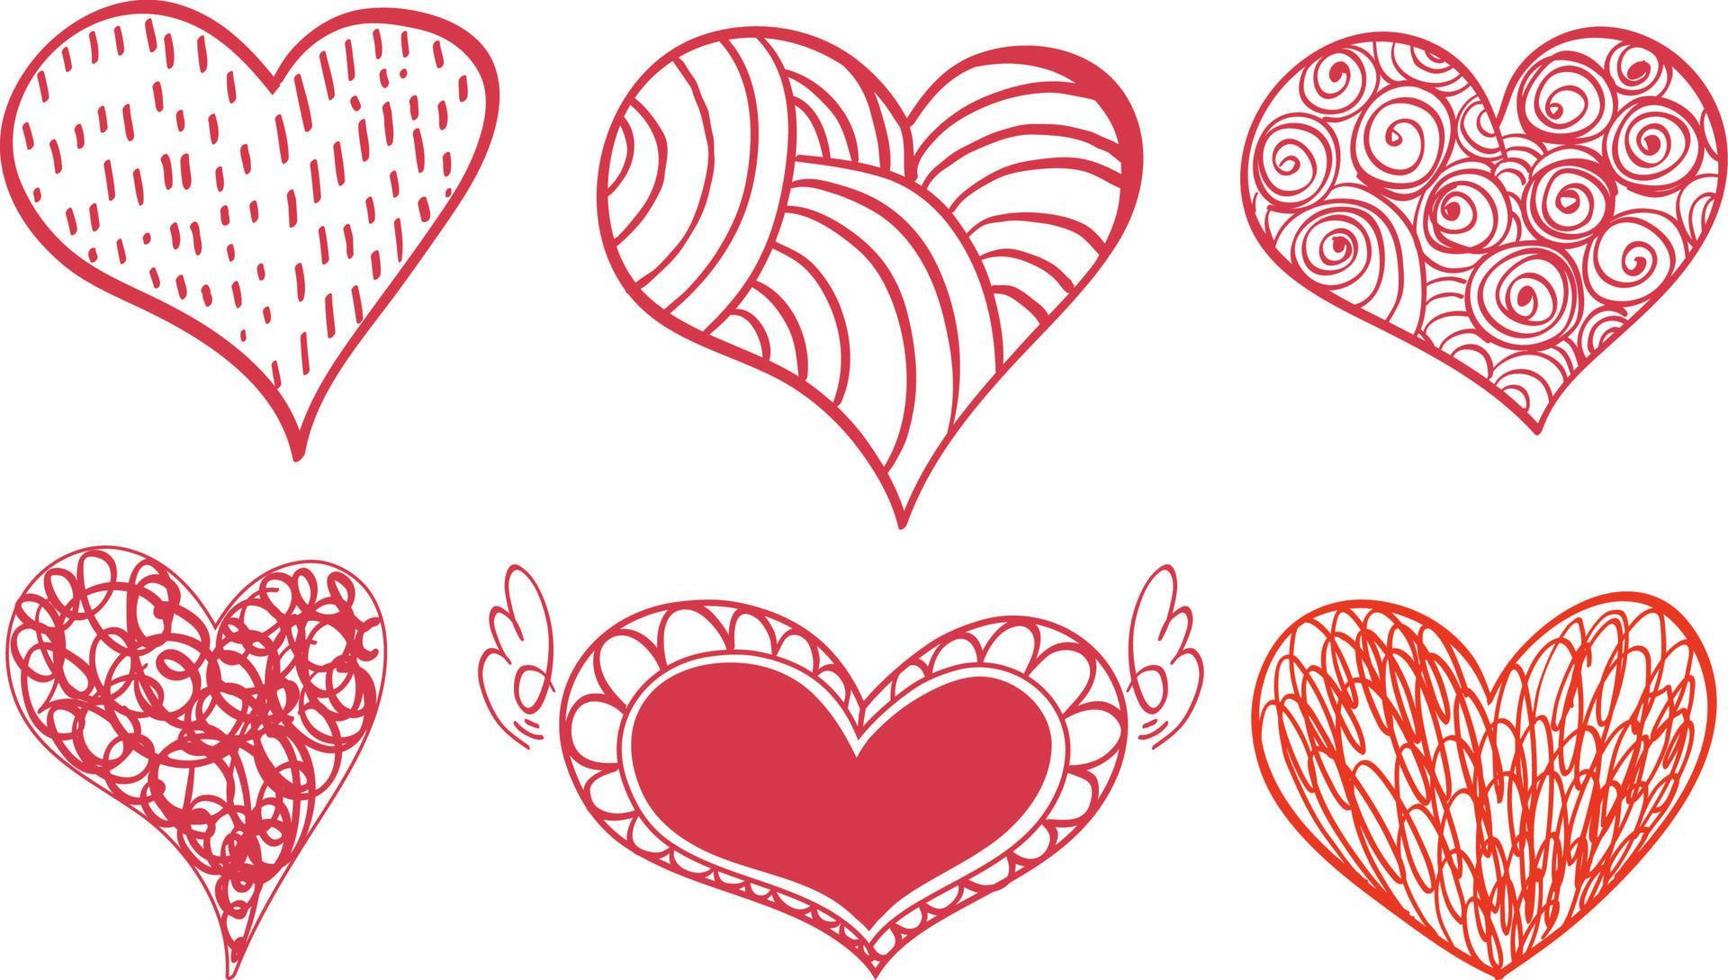 Set of different doodle hearts vector